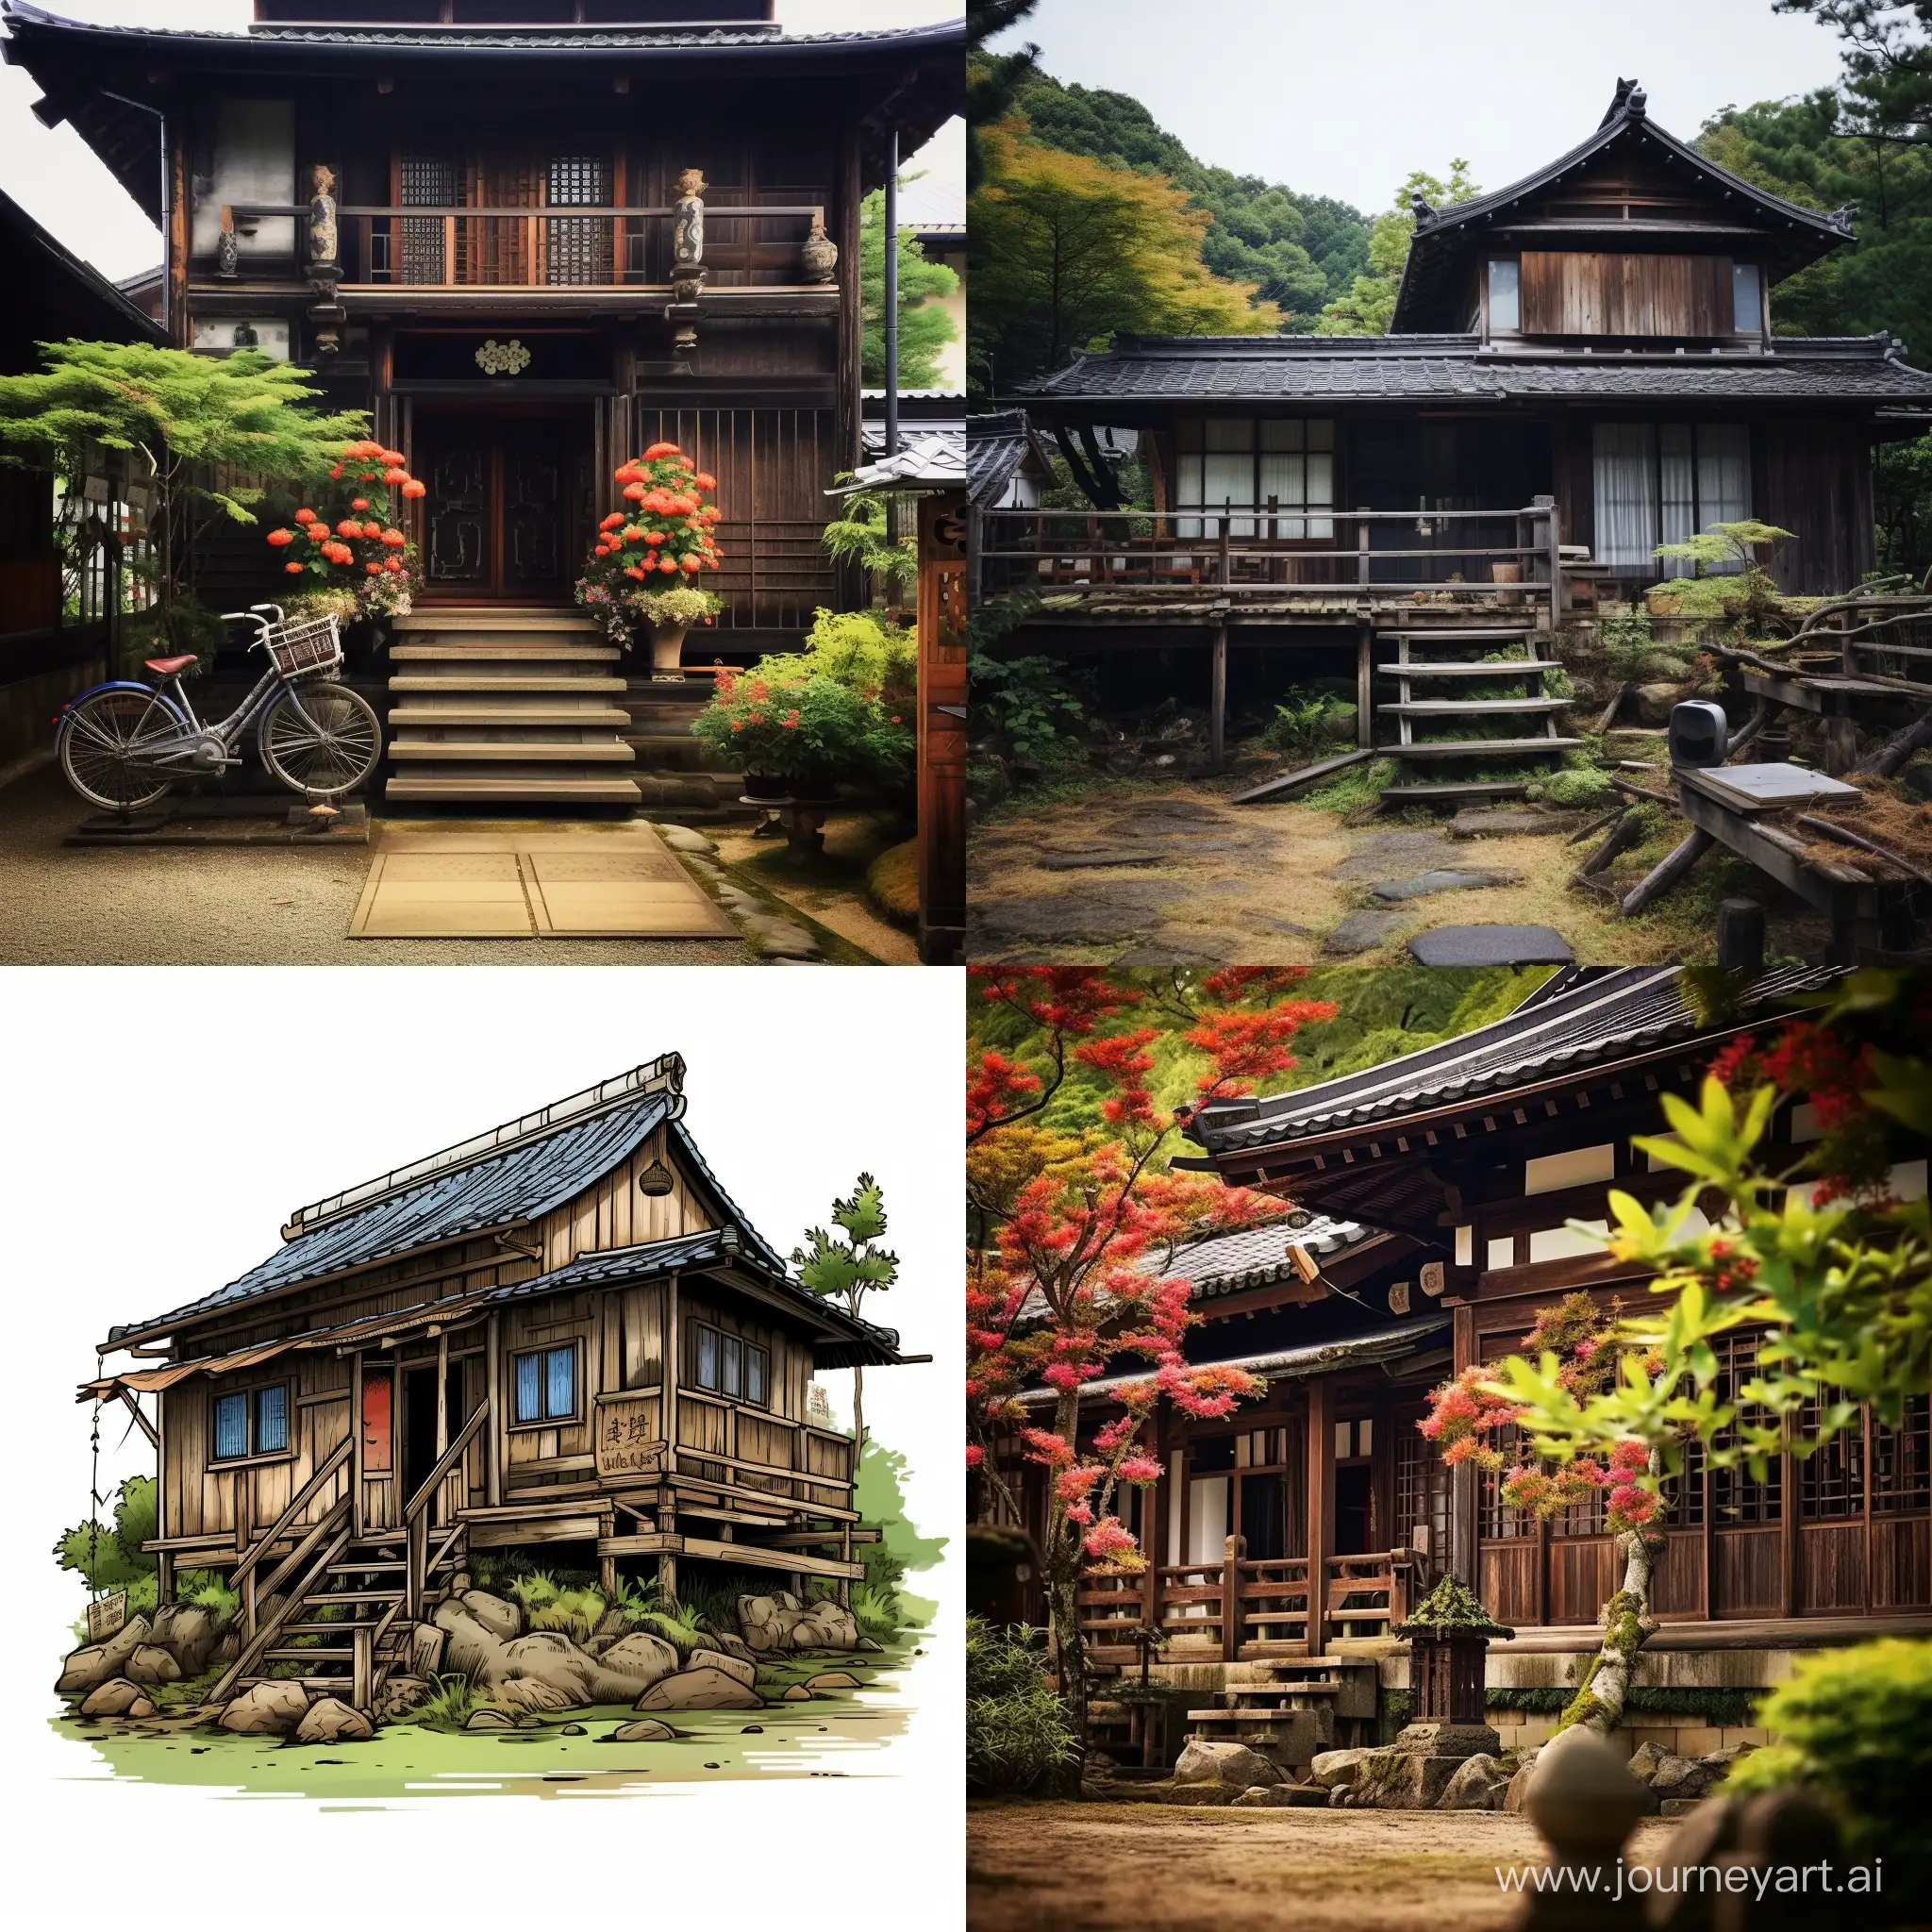 Traditional-Japanese-Wooden-House-in-Rural-Setting